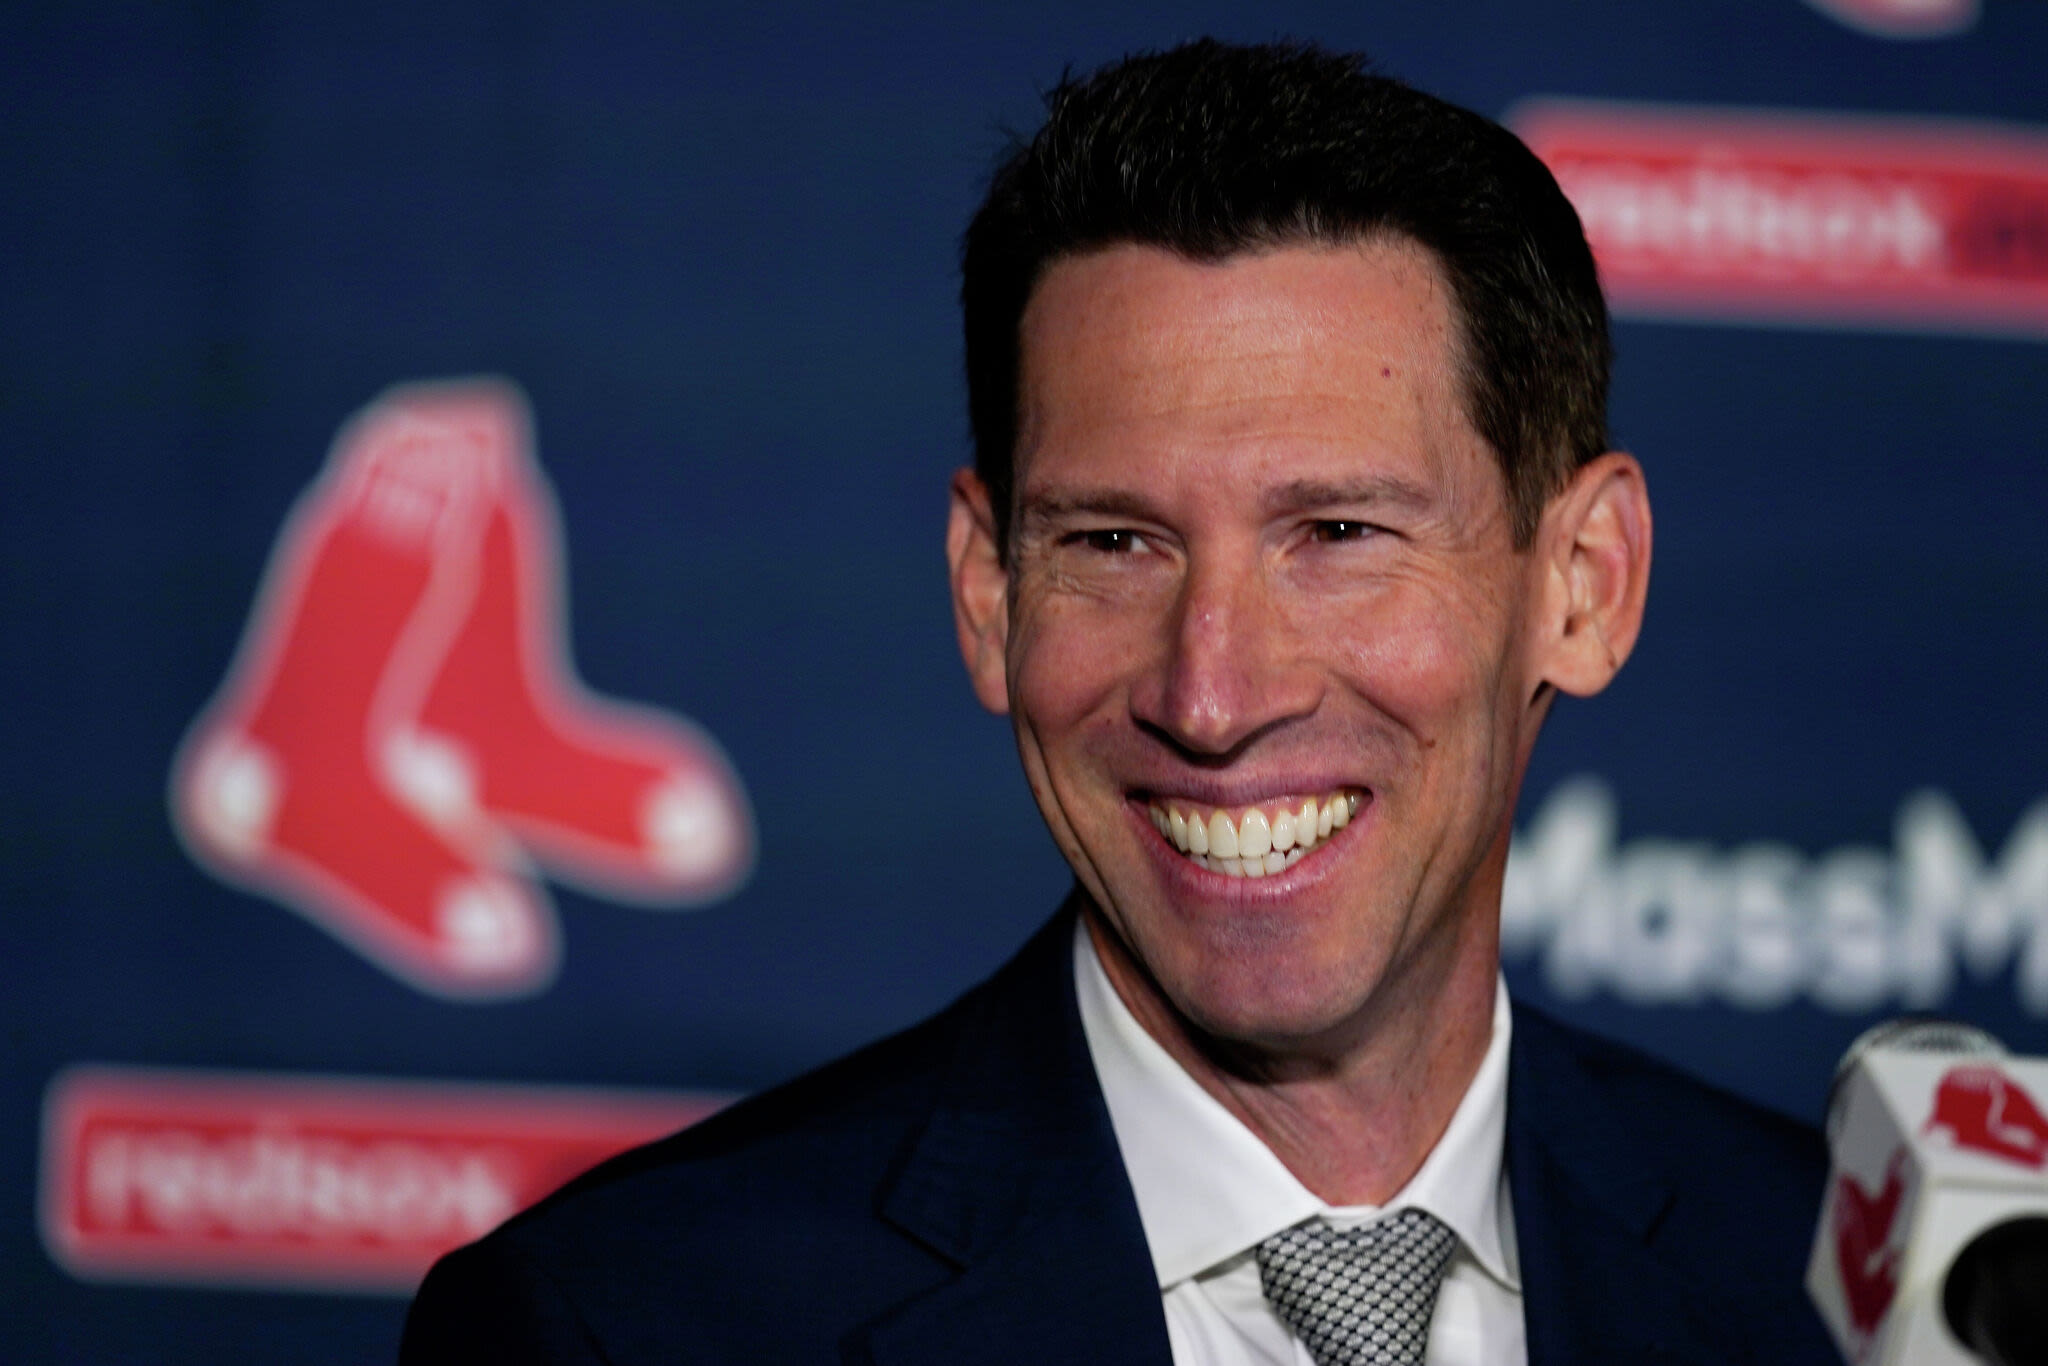 CT's Craig Breslow embraces job as Boston Red Sox chief baseball officer: 'Nothing like it in the world'